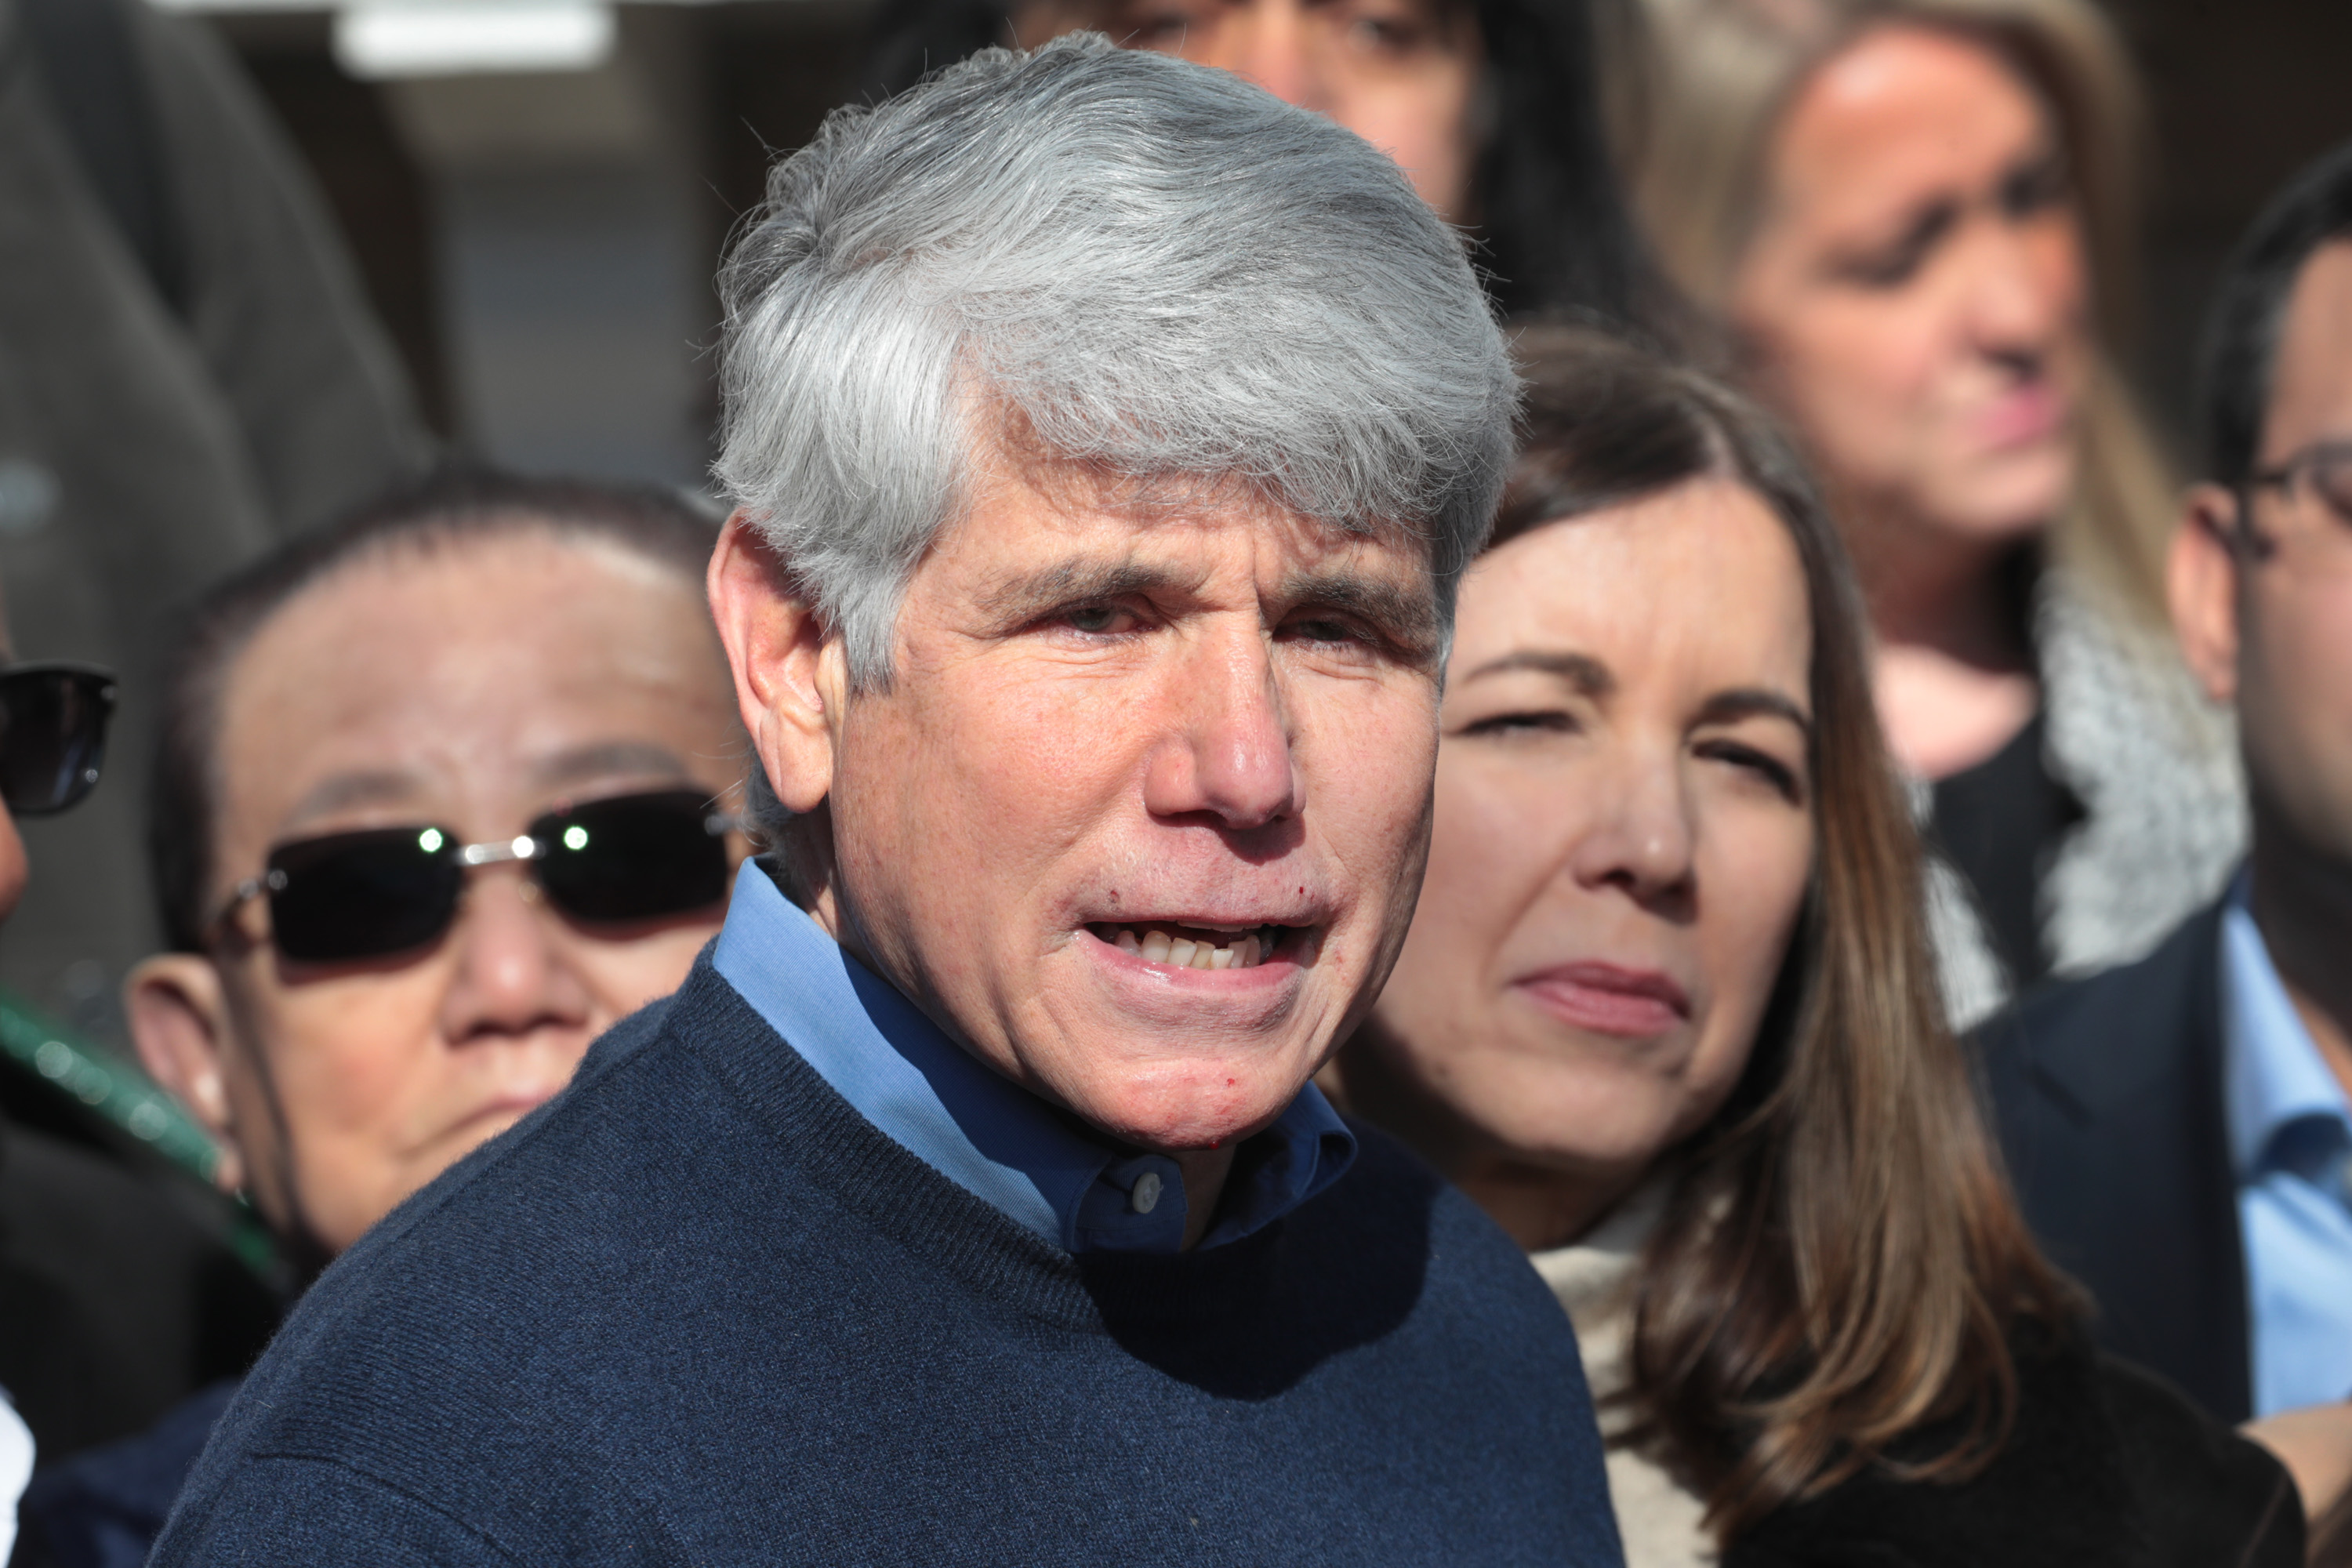 Former Illinois Gov. Rod Blagojevich Speaks To Media Outside His Home, Day After President Trump Commuted His Prison Sentence